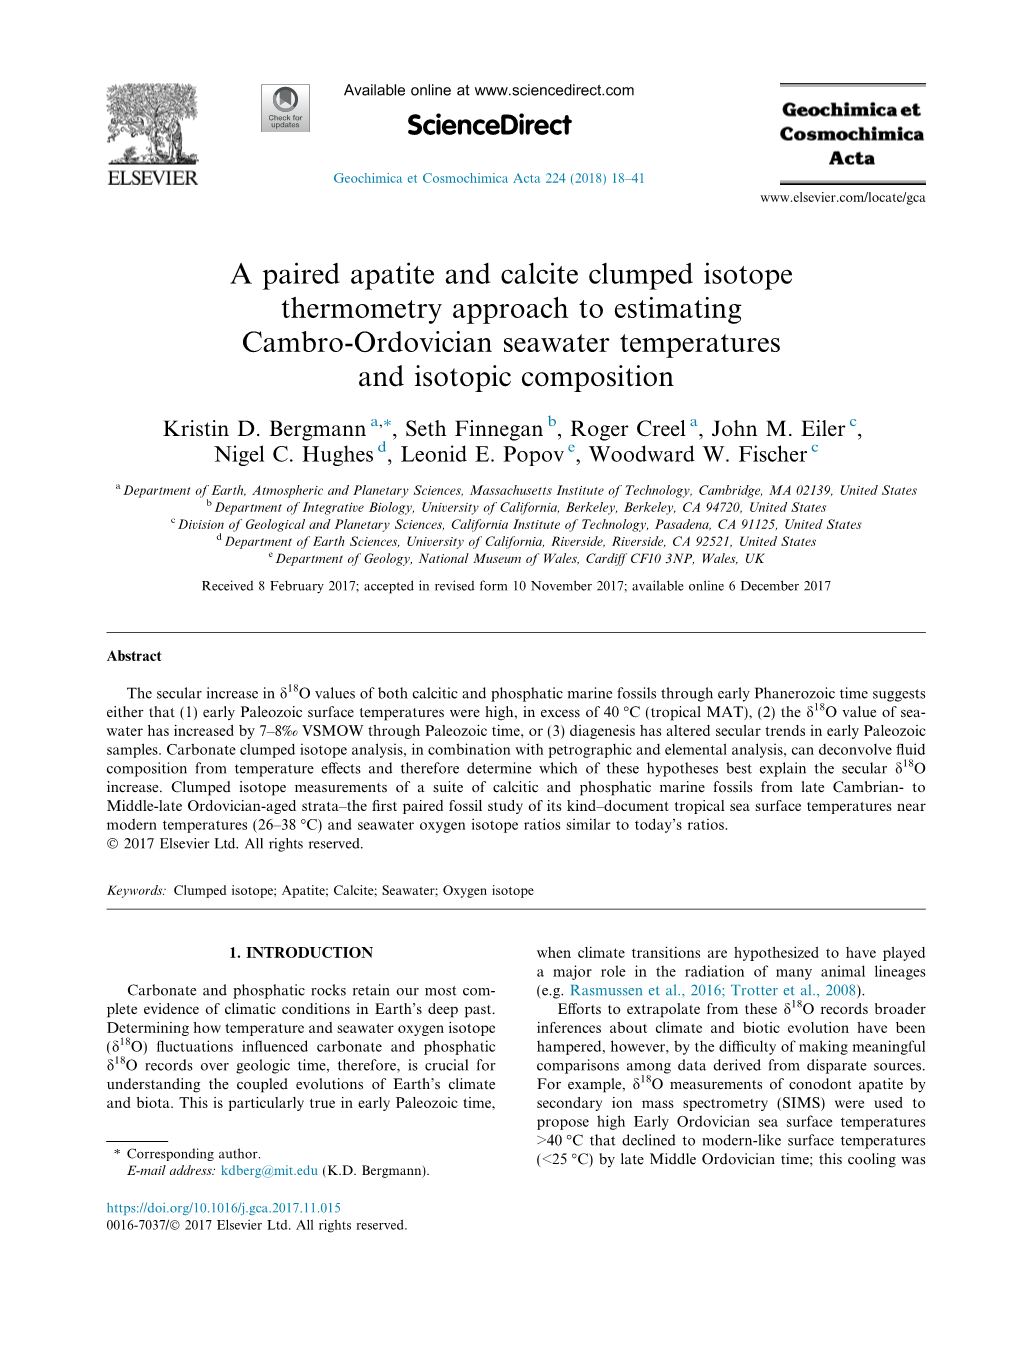 A Paired Apatite and Calcite Clumped Isotope Thermometry Approach to Estimating Cambro-Ordovician Seawater Temperatures and Isotopic Composition